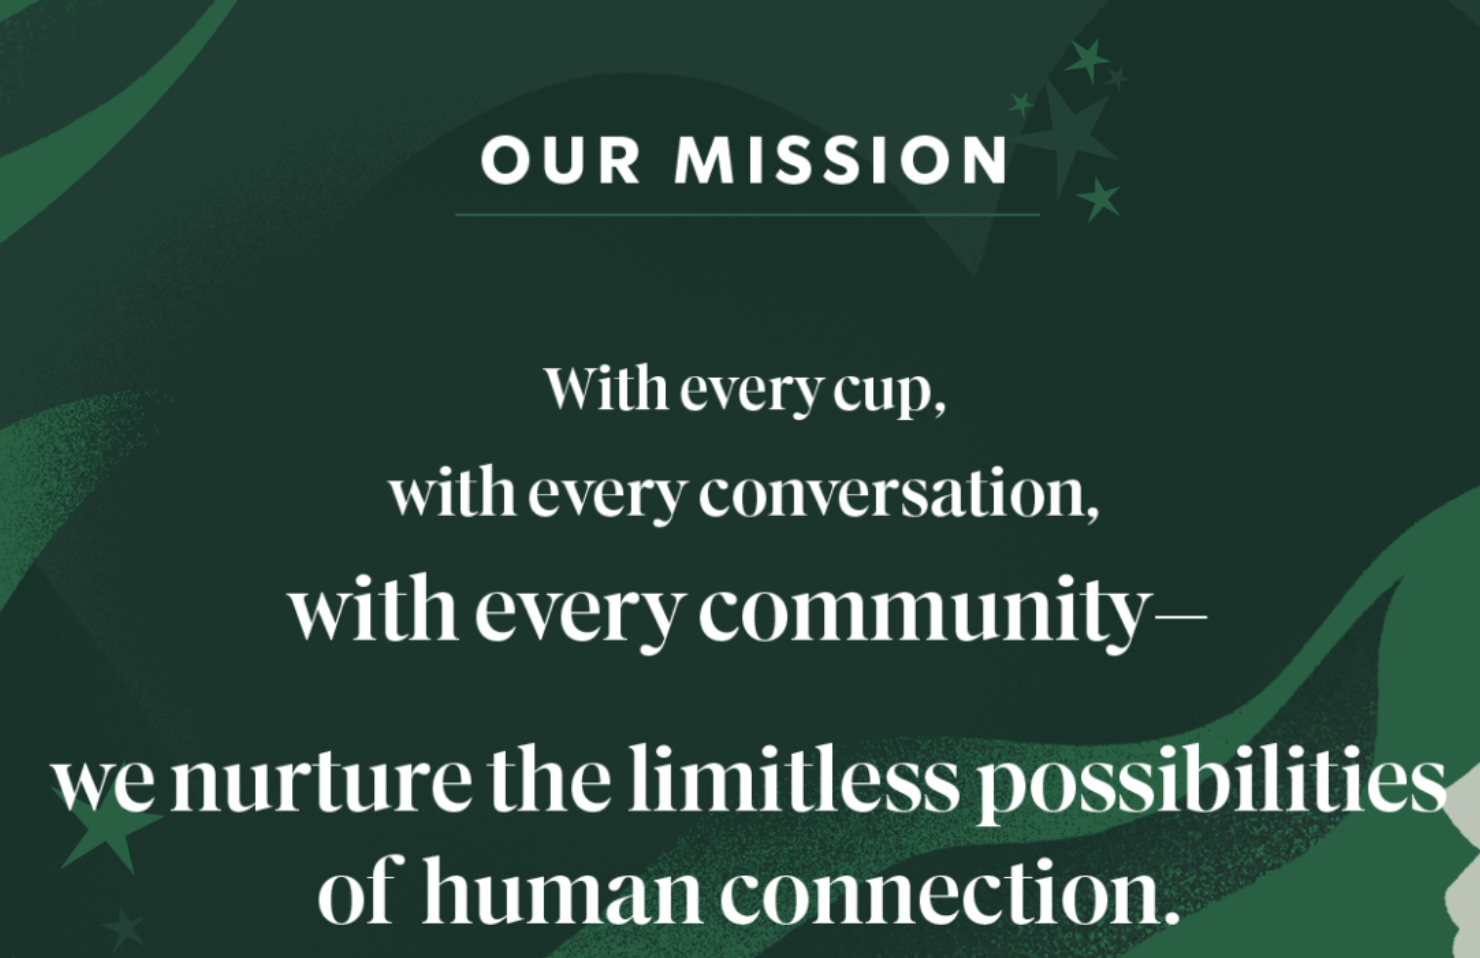 Imagery from Stabrucks’ mission statement pageIMG name: Starbucks